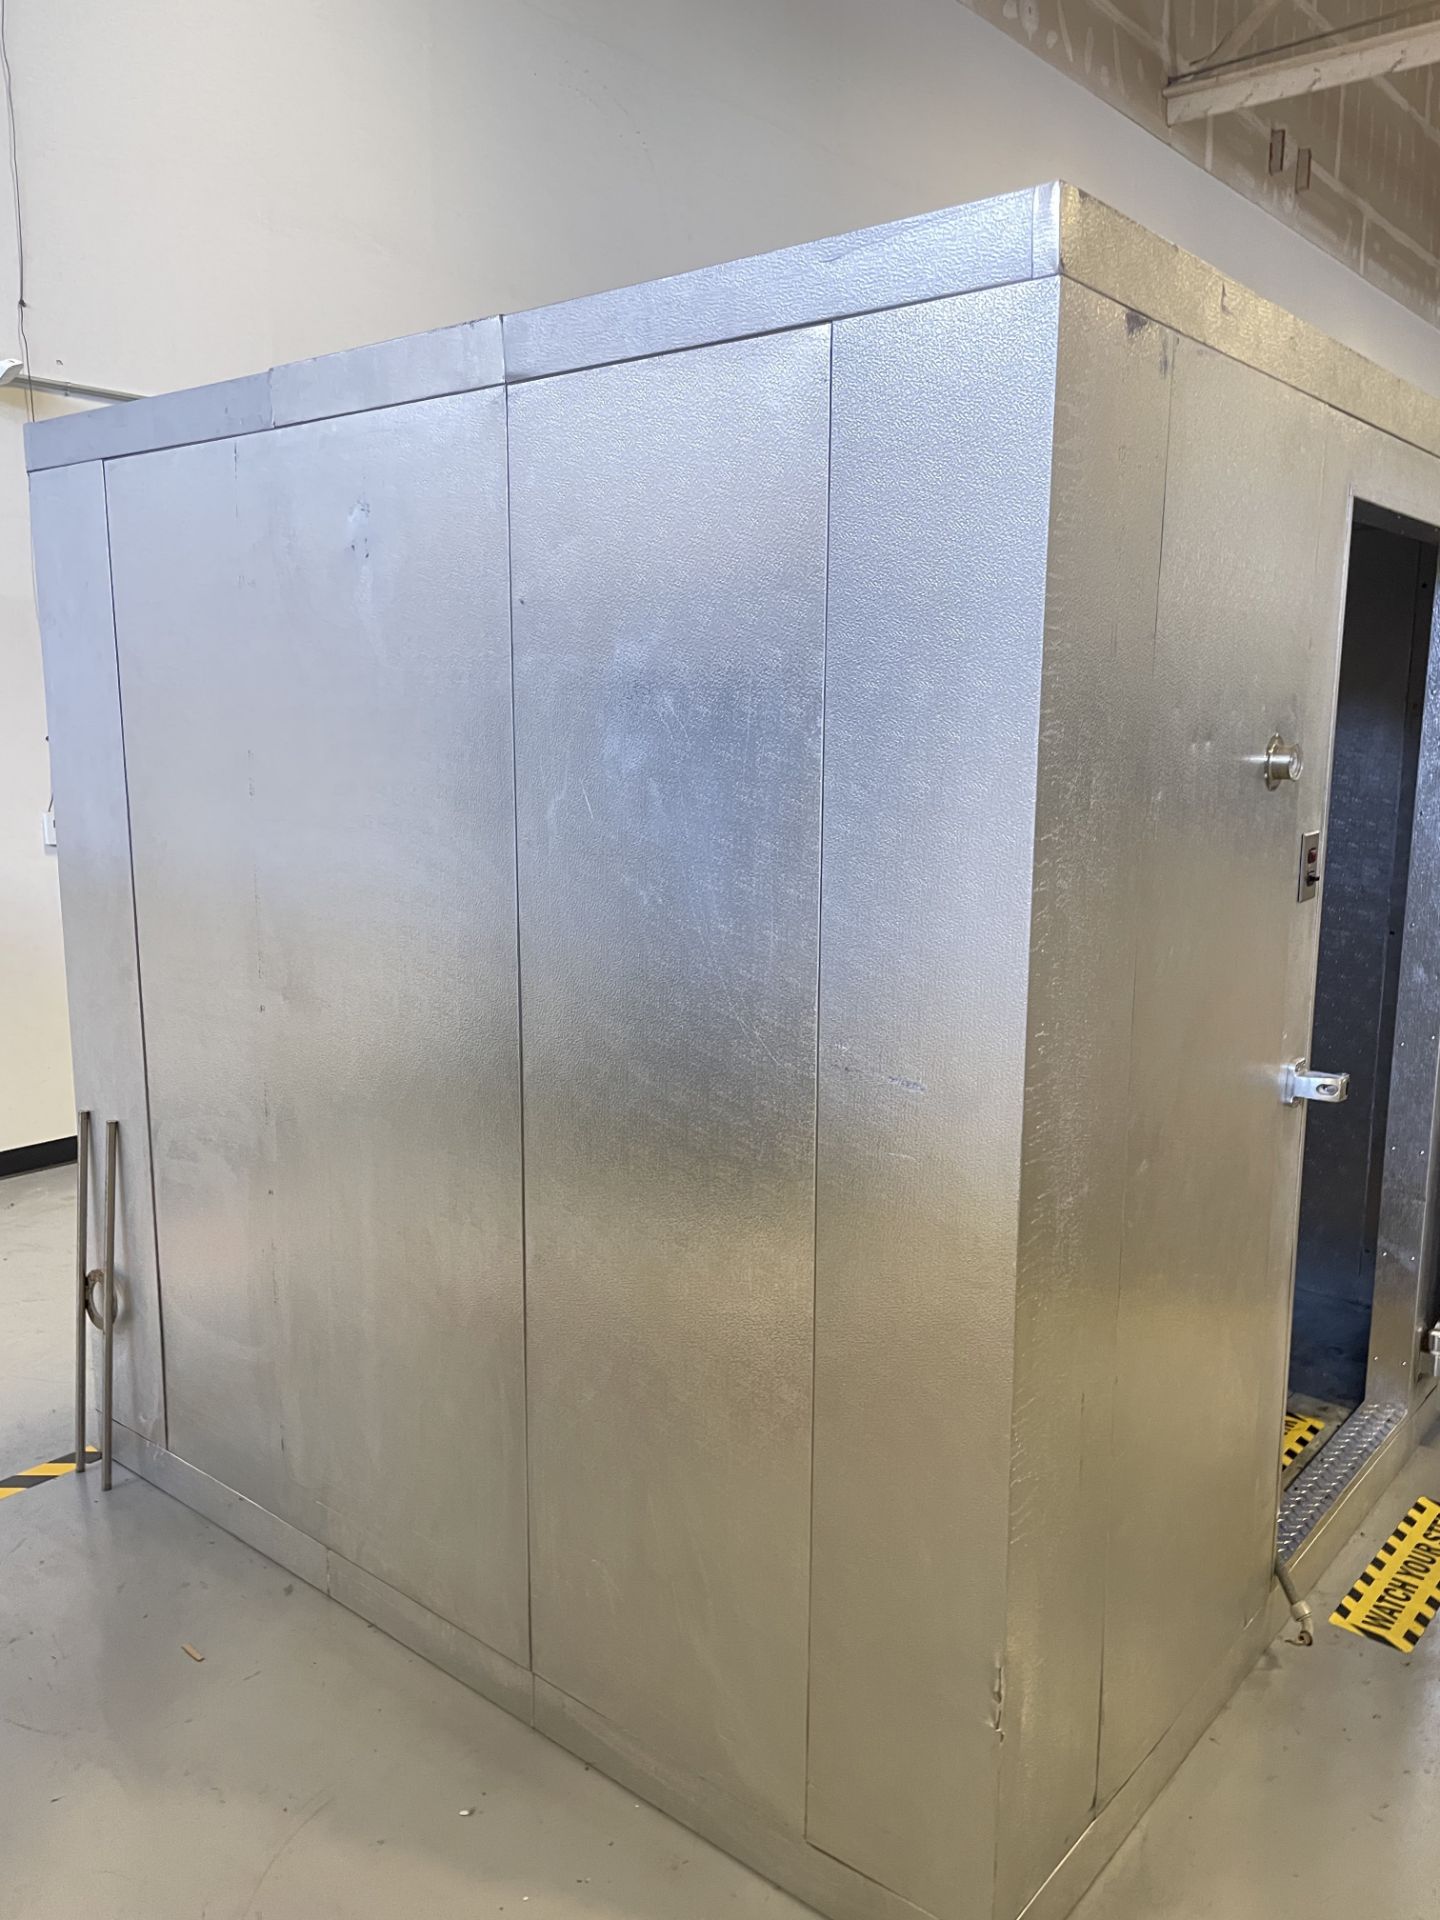 Used Norlake Walk in Cooler w/Cooling Unit. 93”L x 105”W x 90”H & Inner dims: 86”L x 97”W x 82”H - Image 7 of 15